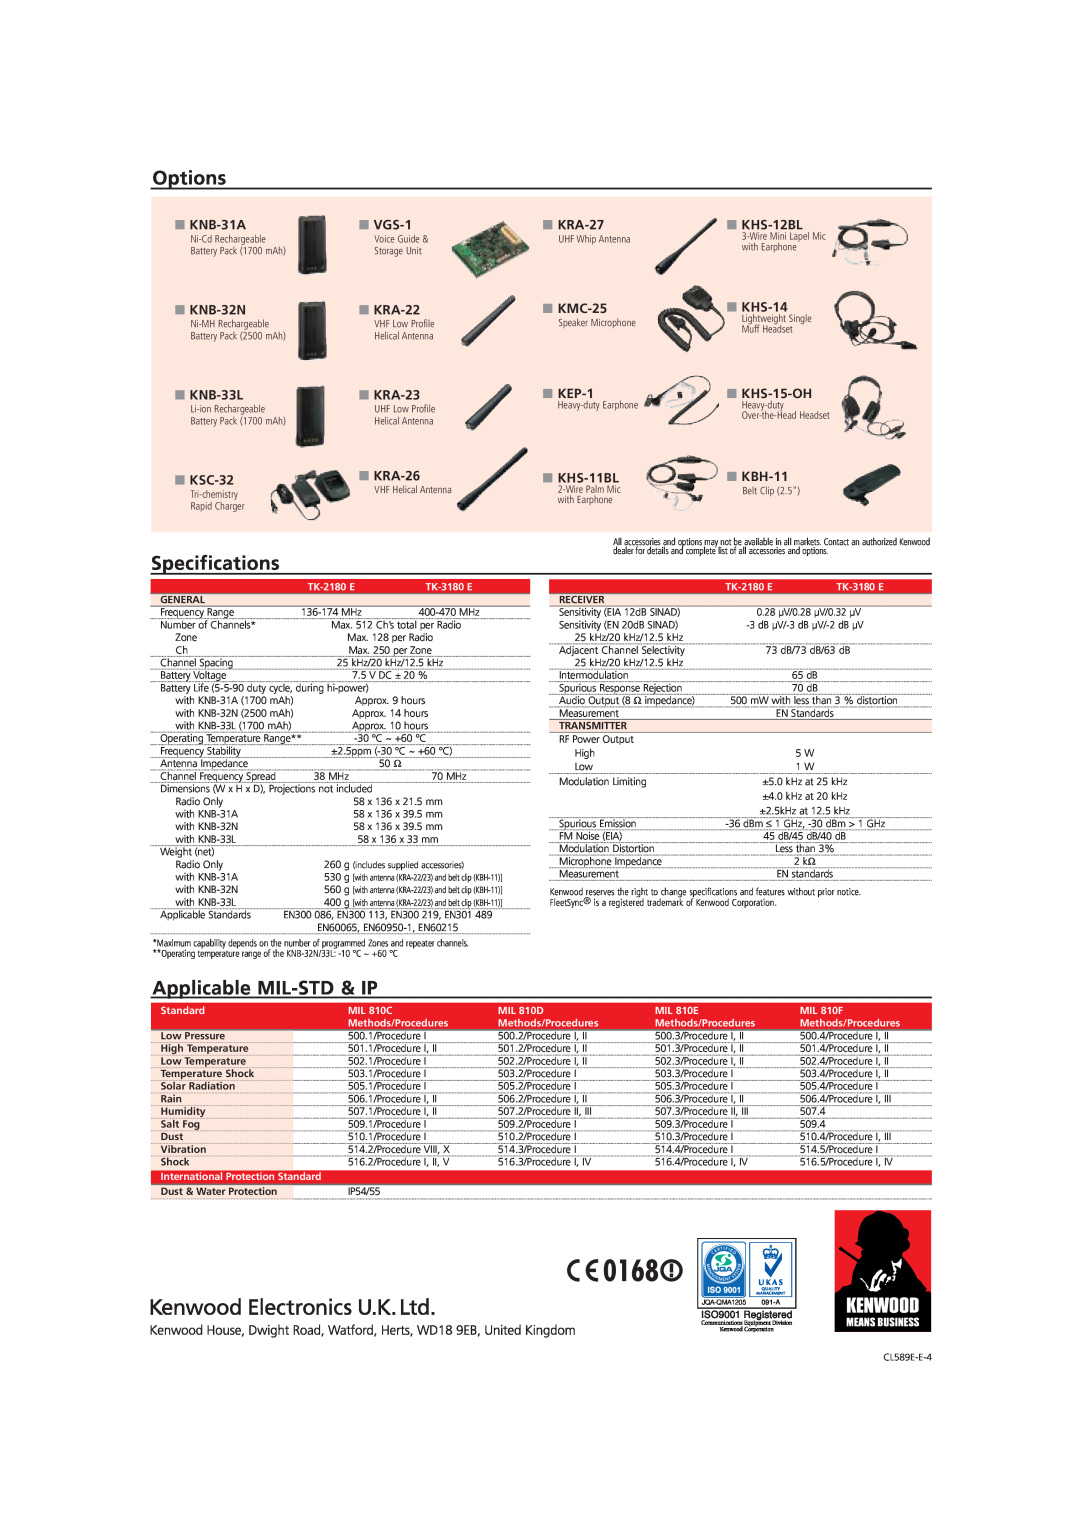 Kenwood TK-2180, TK-3180 manual Options, Specifications, Applicable MIL-STD& IP 